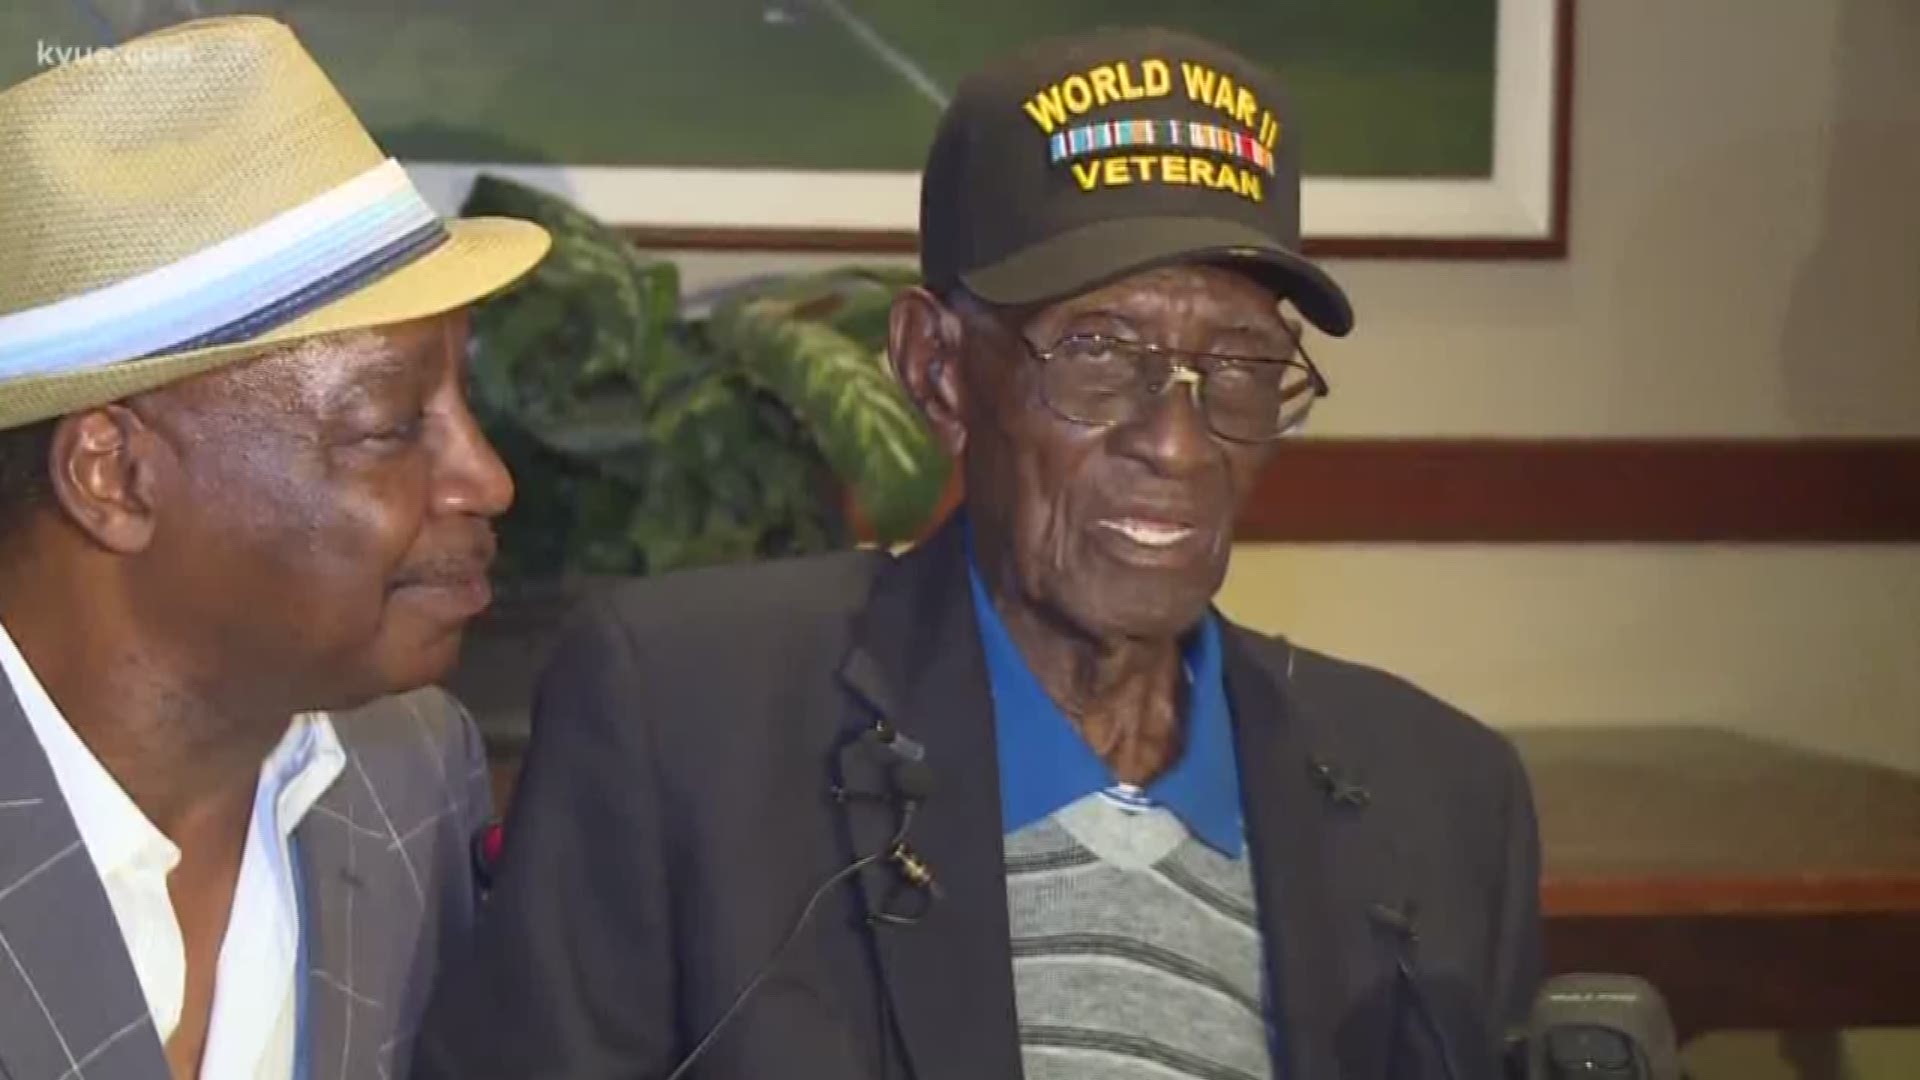 America's oldest living man and the oldest World War II veteran, Richard Overton, will celebrate another birthday May 11, 2018.